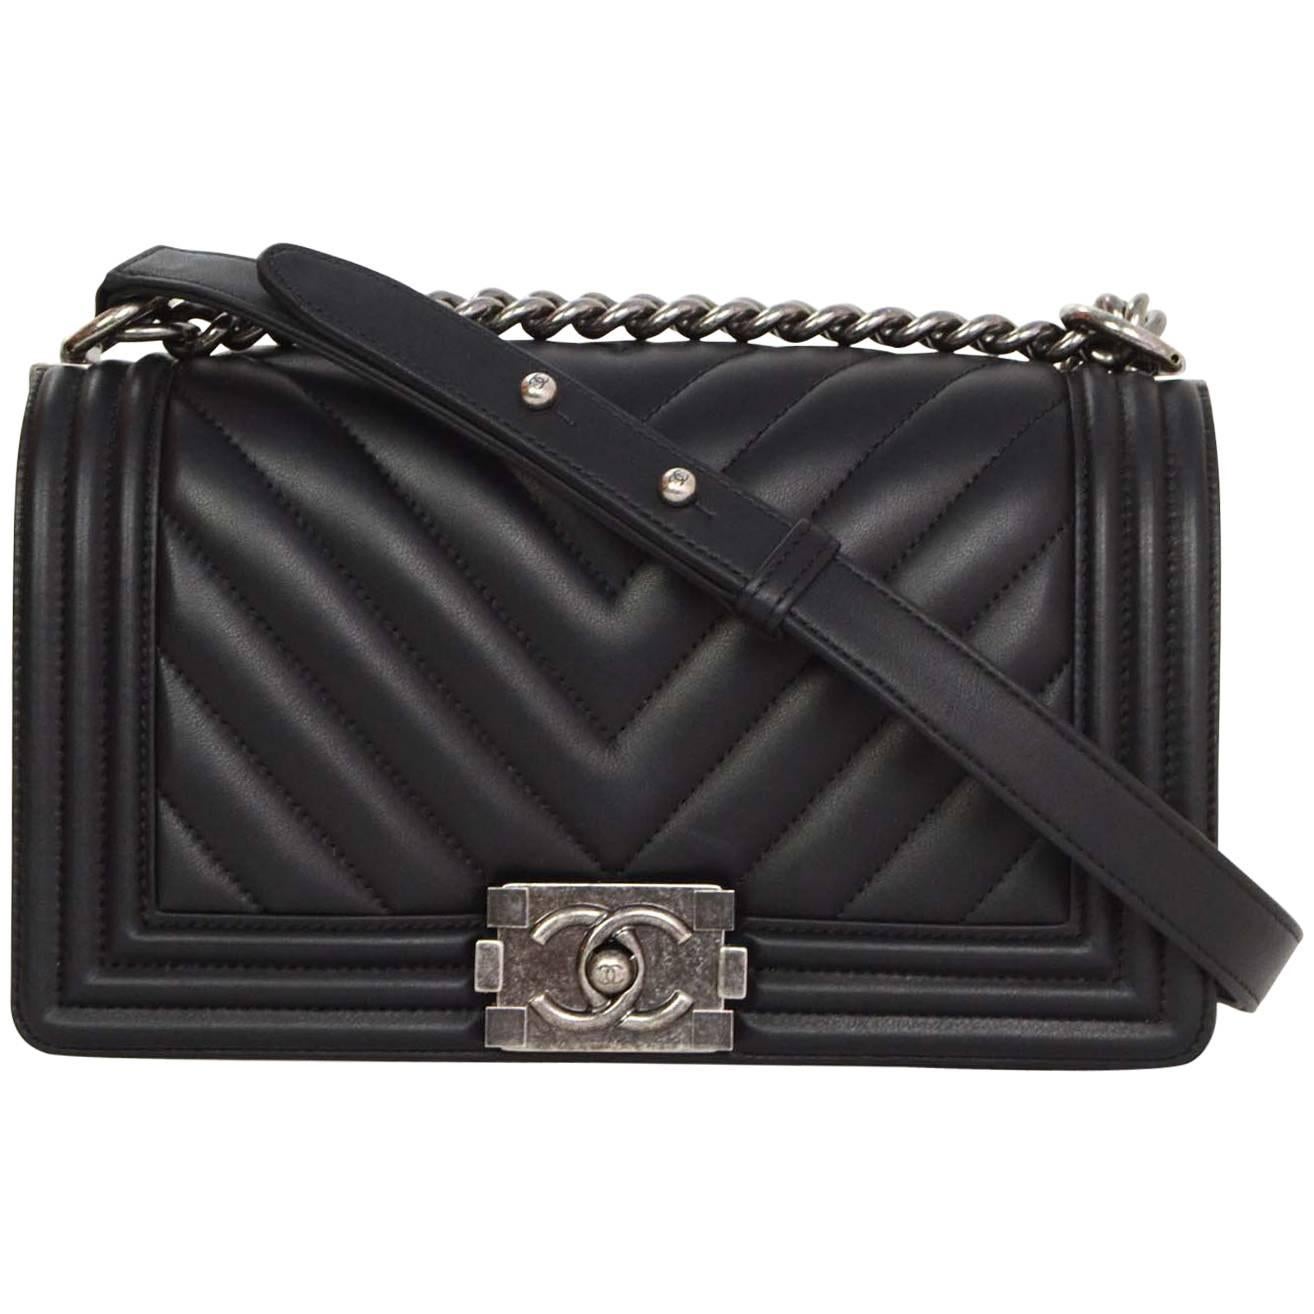 Chanel '16 Black Chevron Quilted Lambskin Leather Old Medium Boy Bag